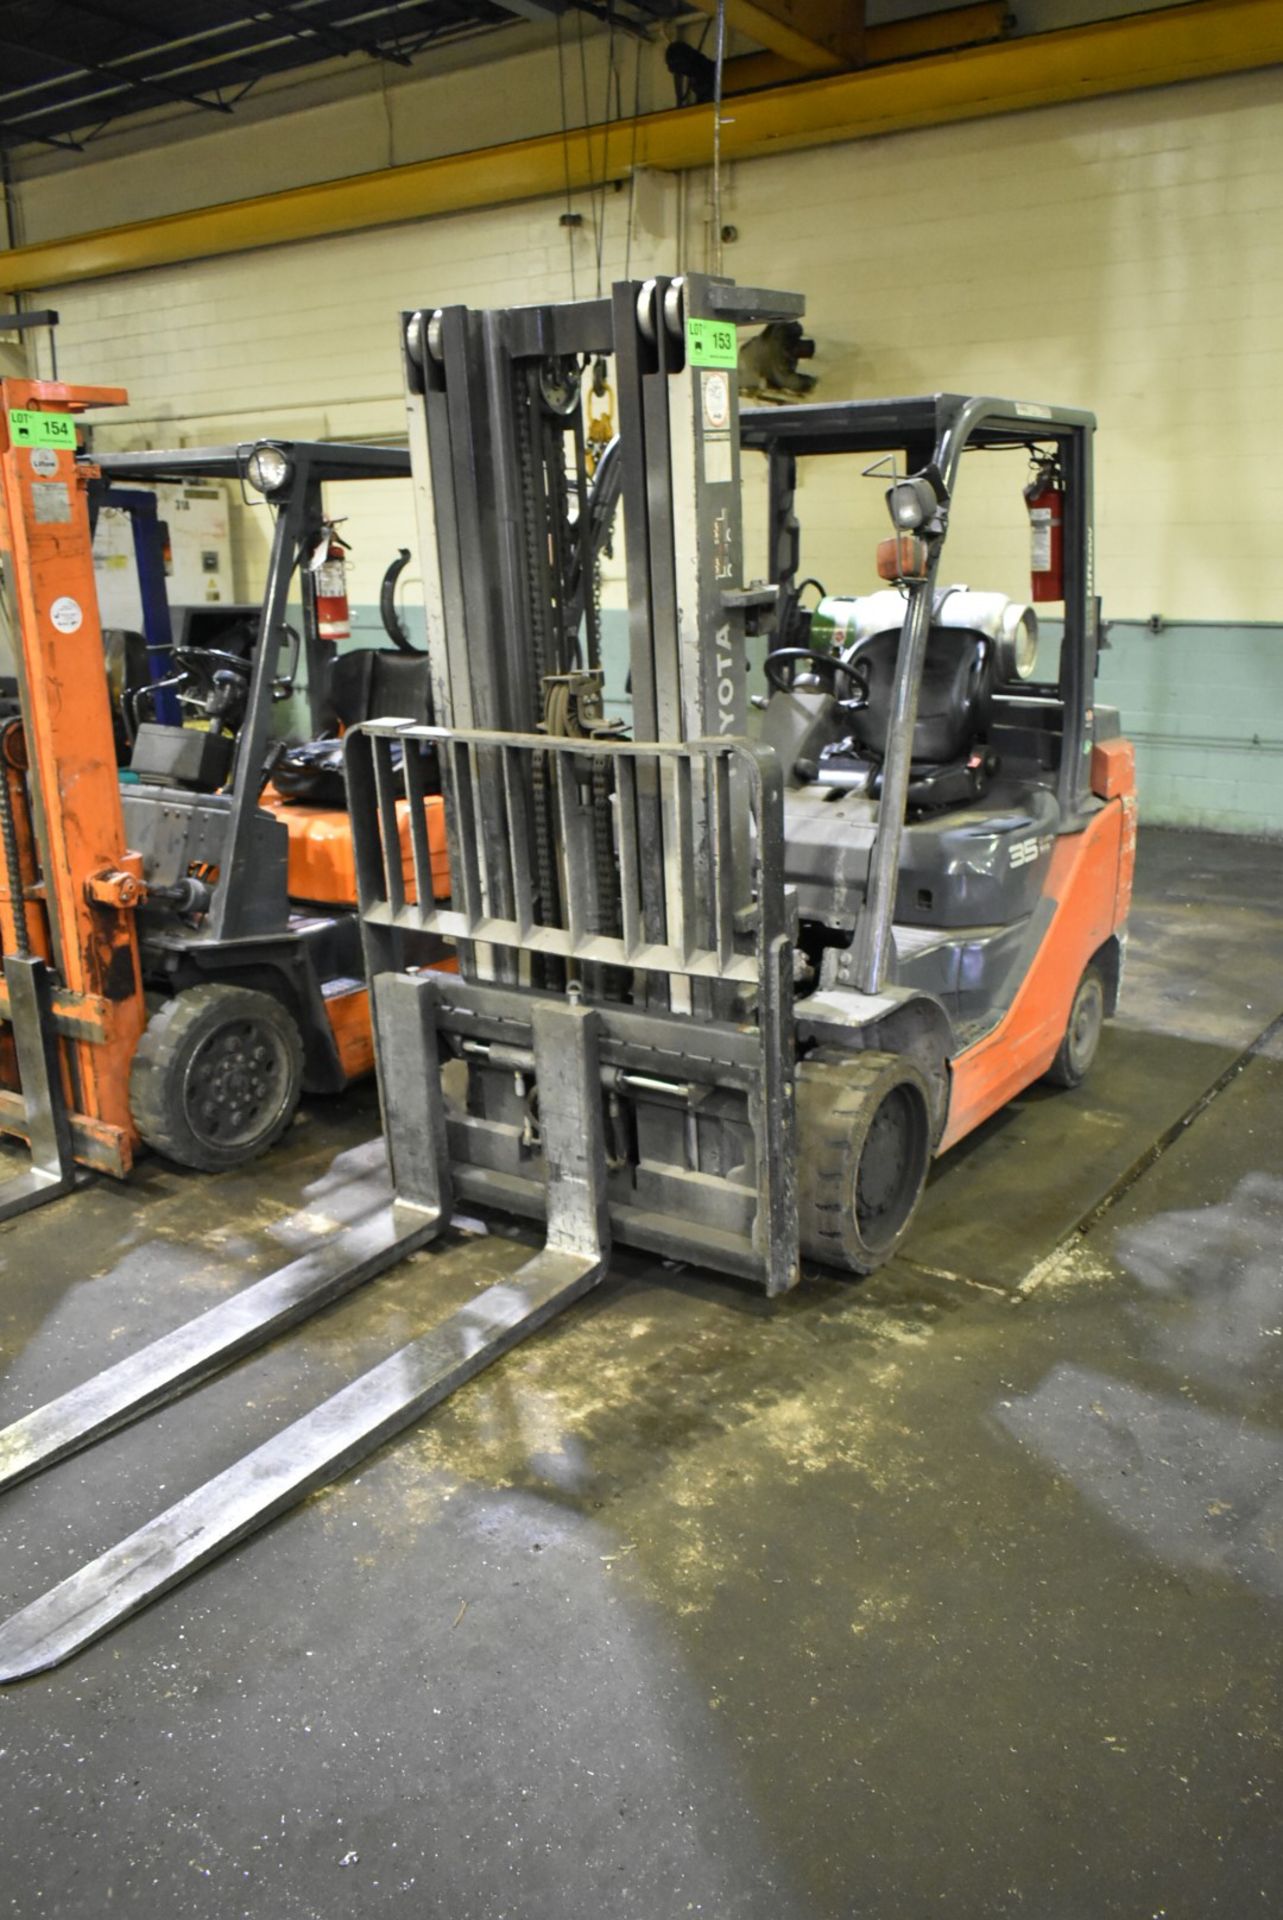 TOYOTA (2018) GC35U LPG FORKLIFT WITH 7250 LBS MAX CAPACITY, 187" 3-STAGE HIGH VISIBILITY MAST, - Image 8 of 8